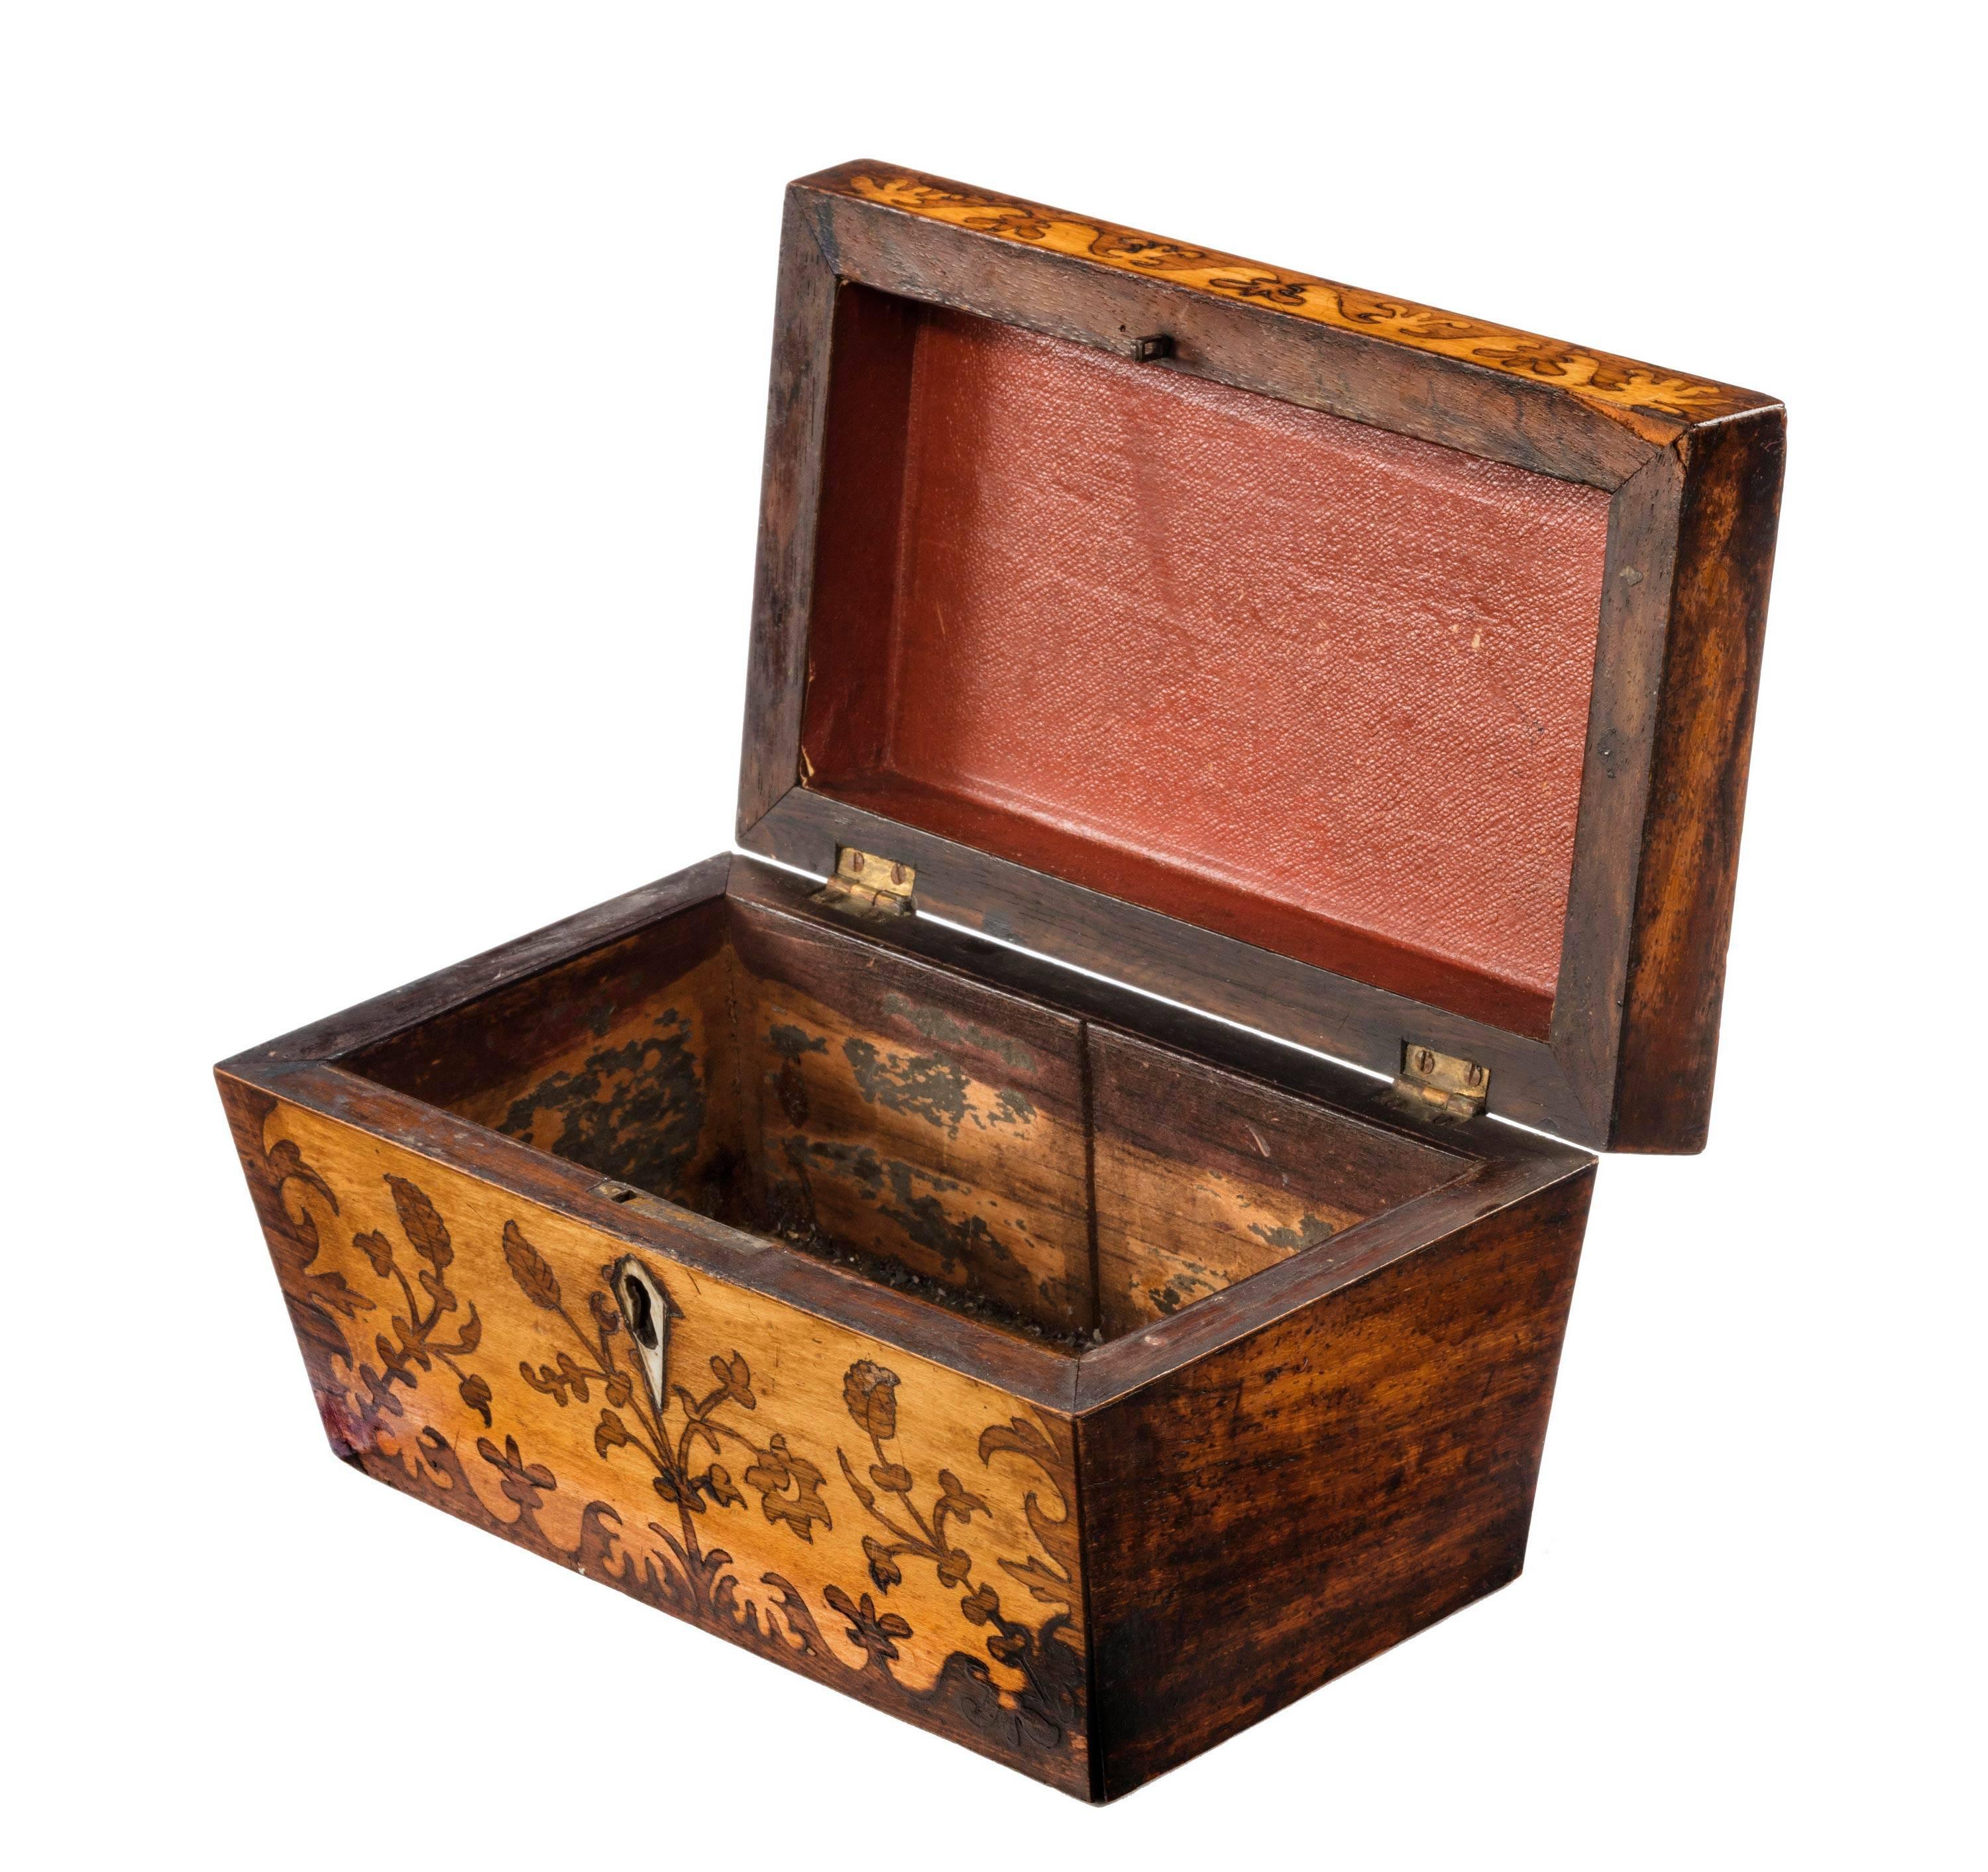 Regency period satinwood marquetry inlaid caddy with mother-of-pearl escutcheon. The interior now missing, but overall it is in excellent original condition.